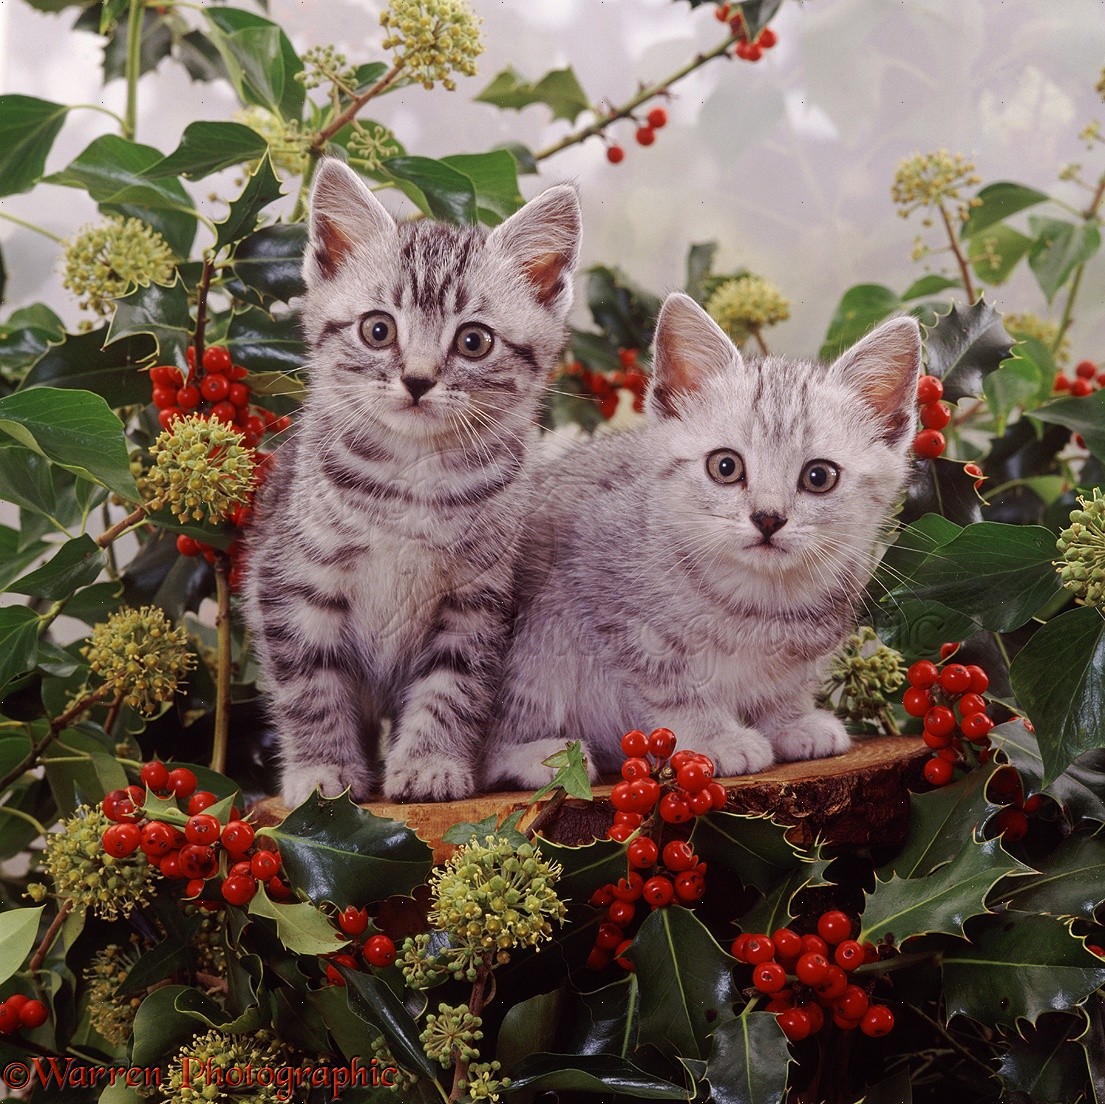 Silver tabby kittens among holly berries and ivy  flowers 